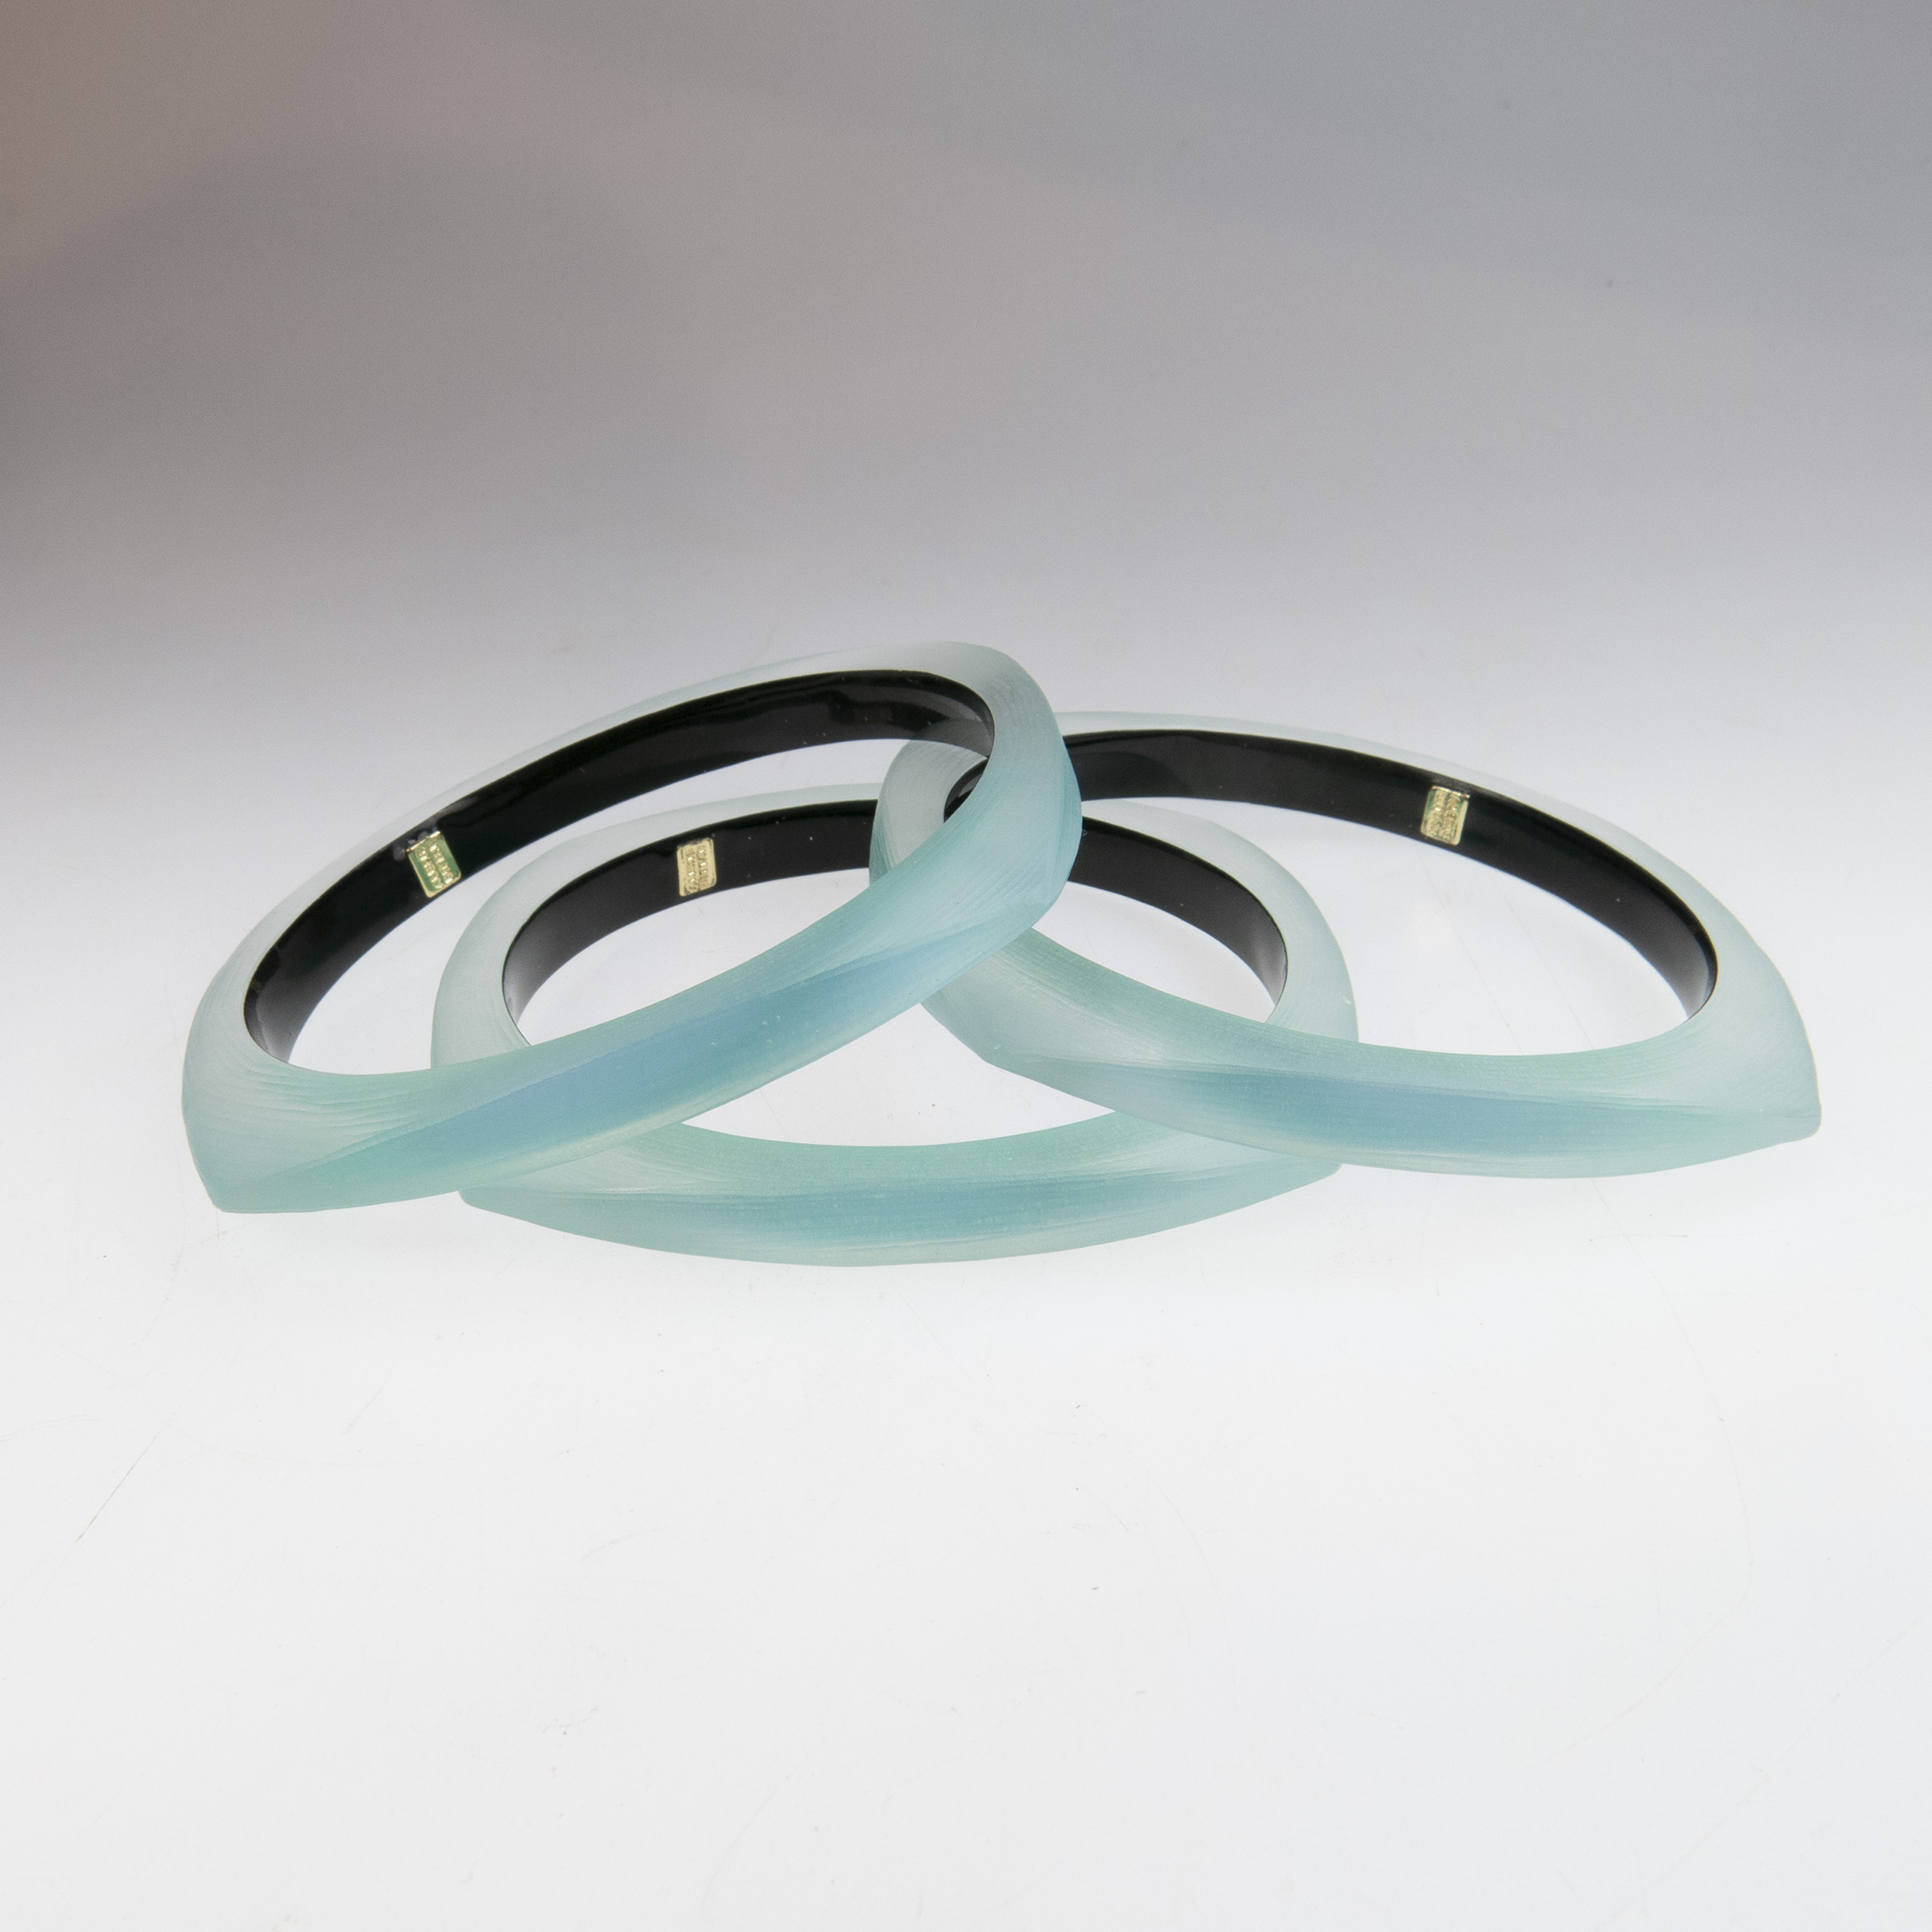 Three Alexis Bittar Carved Green Lucite Squared Bangles